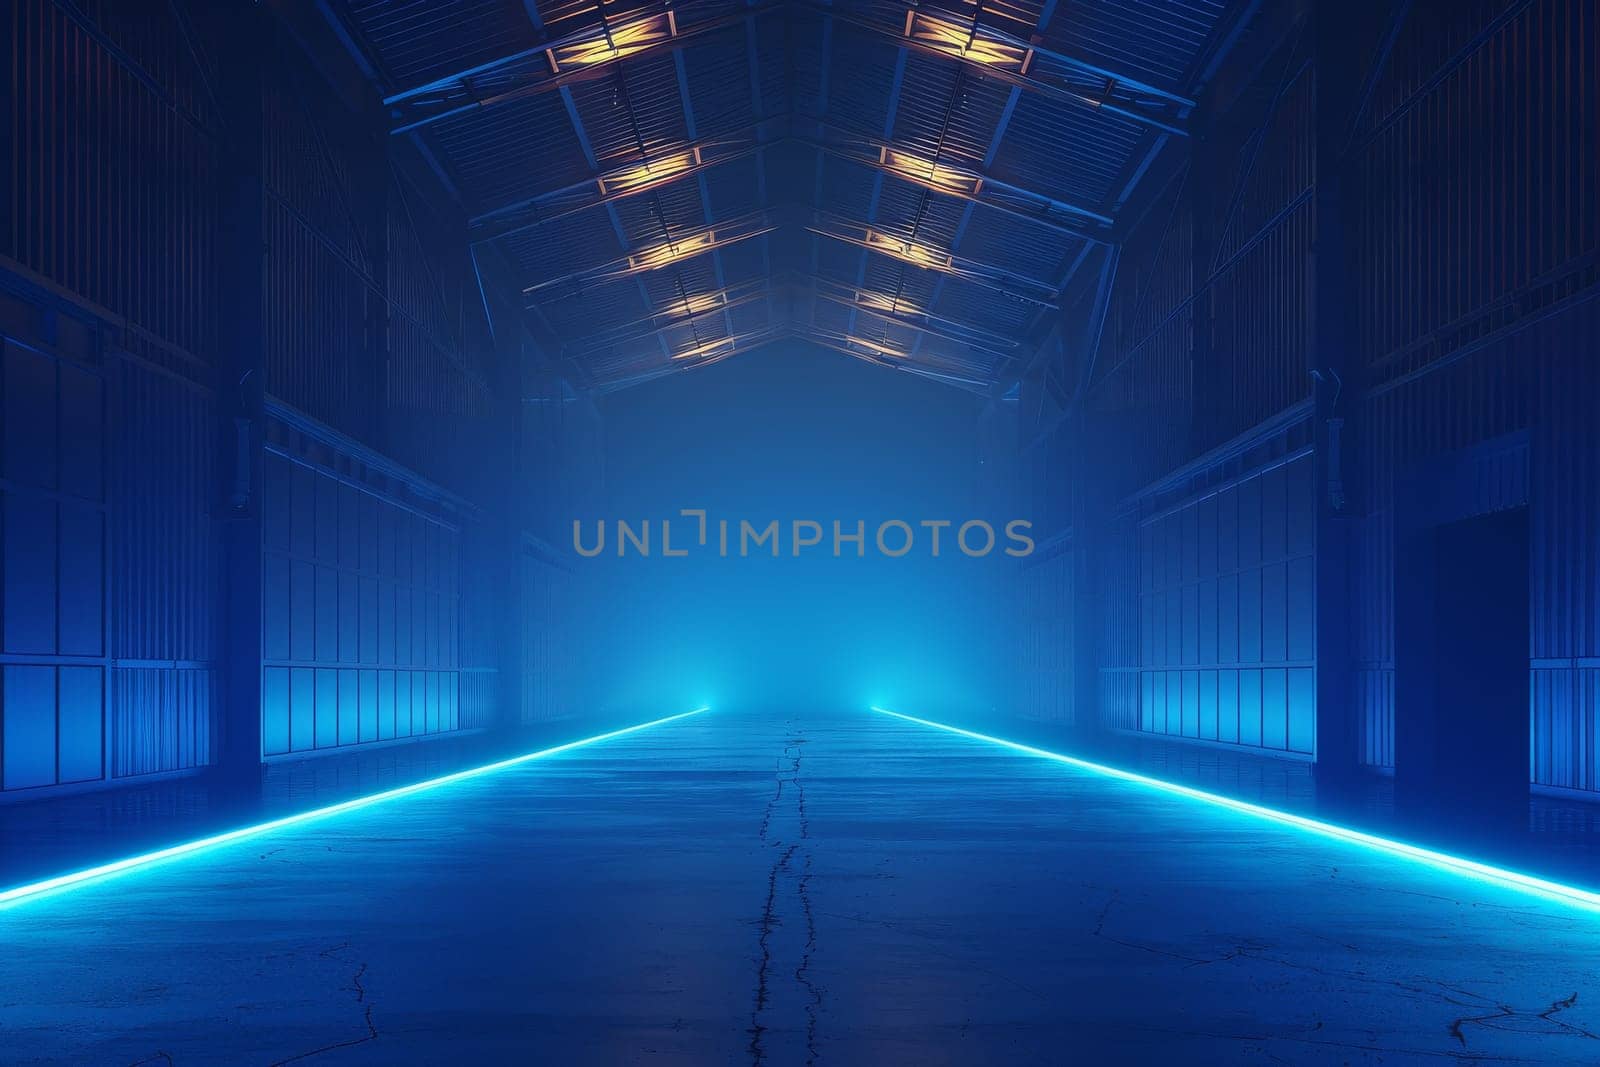 A long, empty, blue hallway with a bright blue light shining down on it.